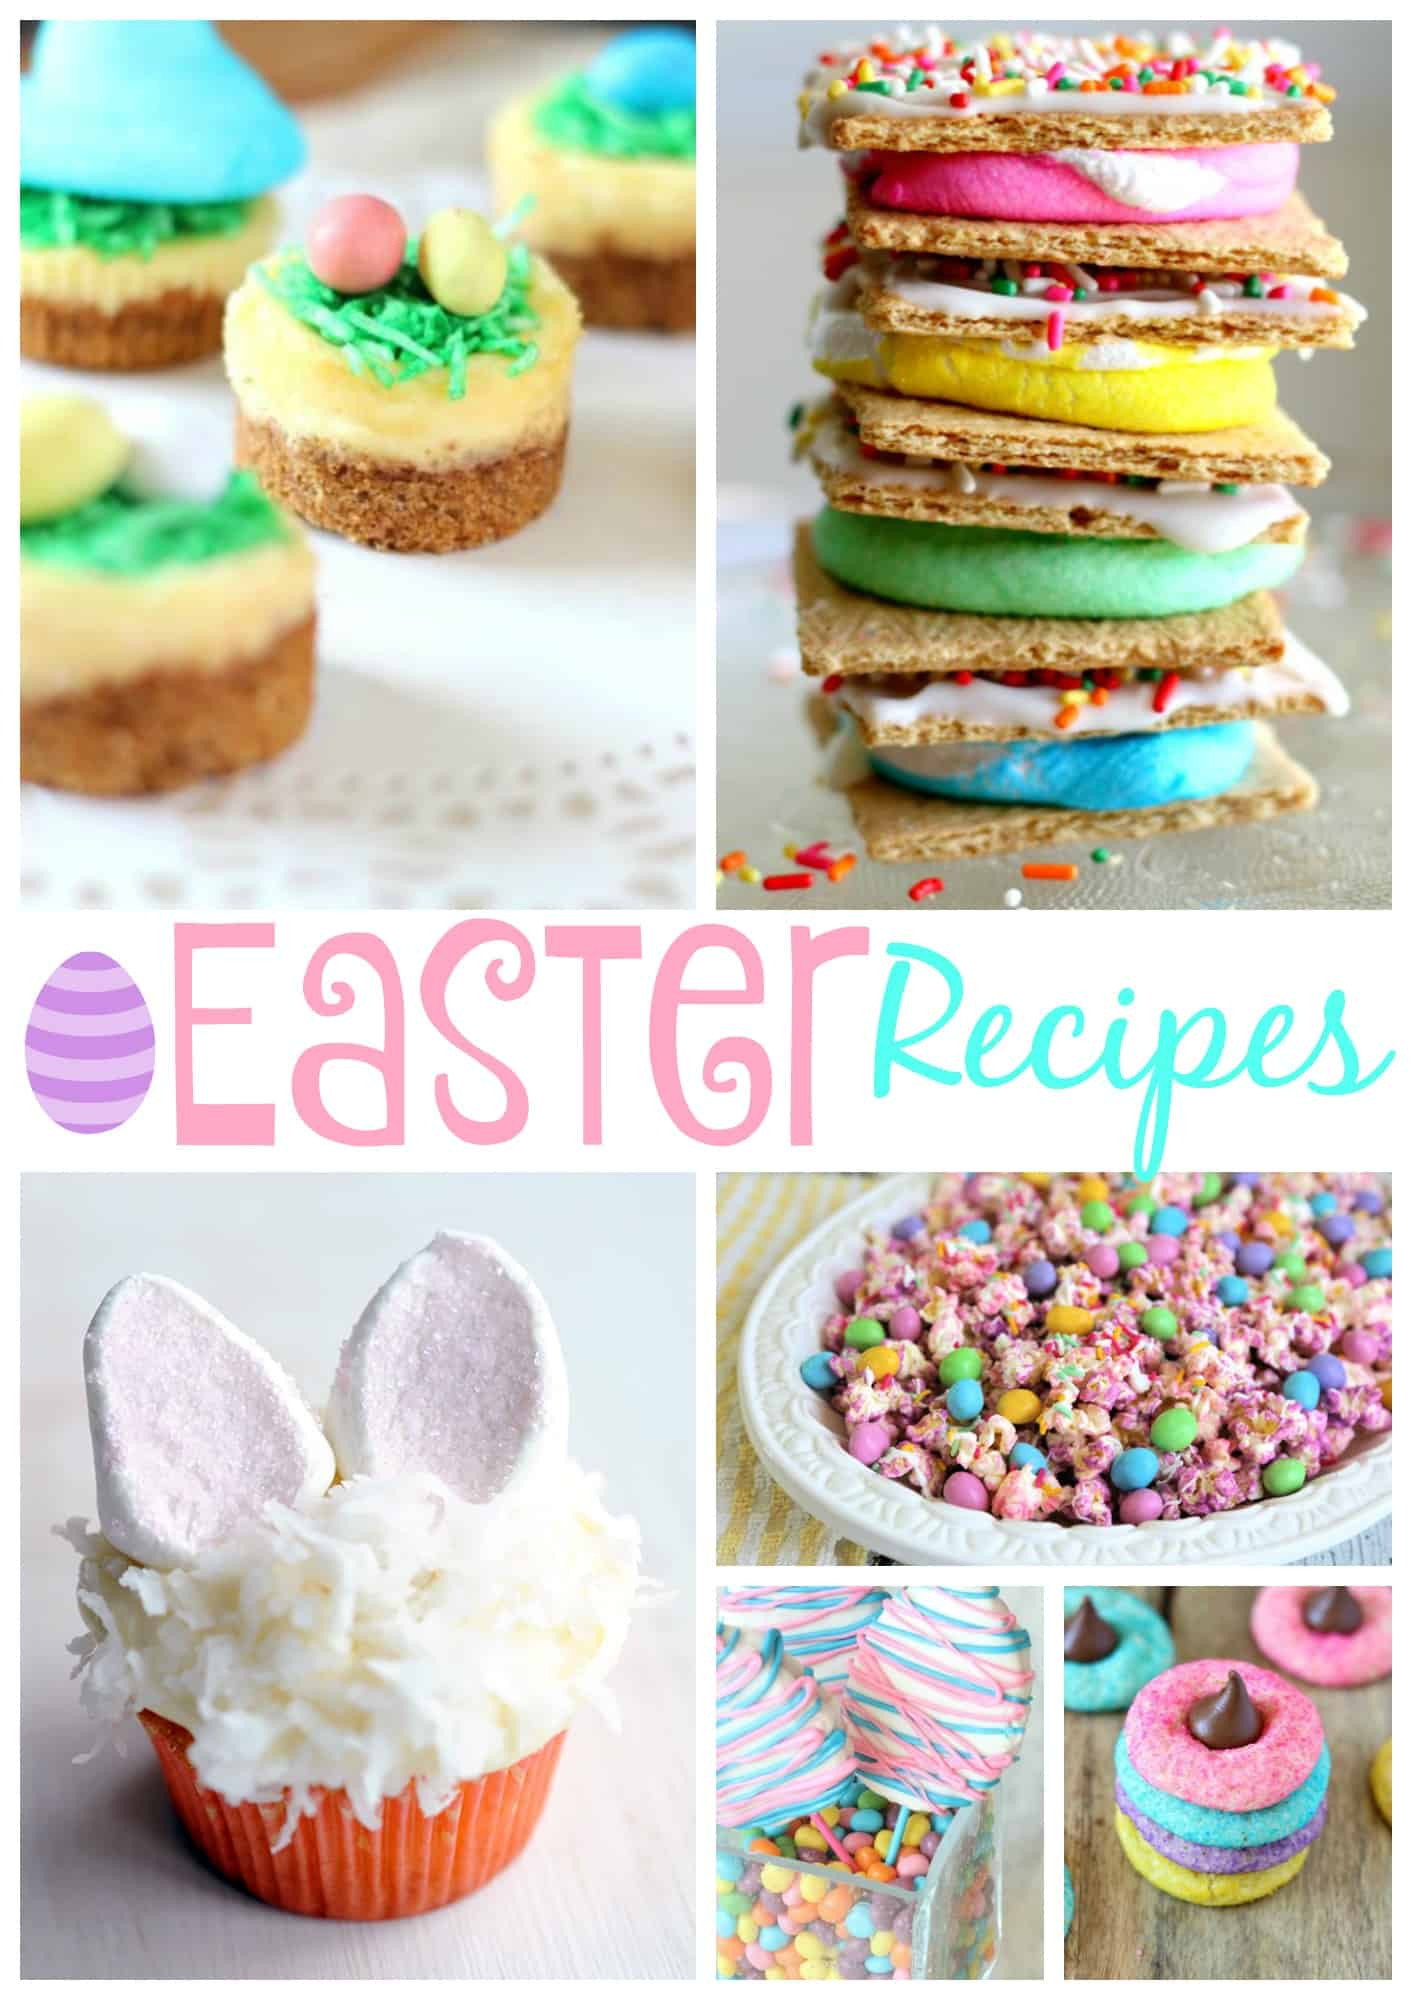 Recipe For Easter Desserts
 Cute Easter Dessert Recipes Best Ideas that You Can Do